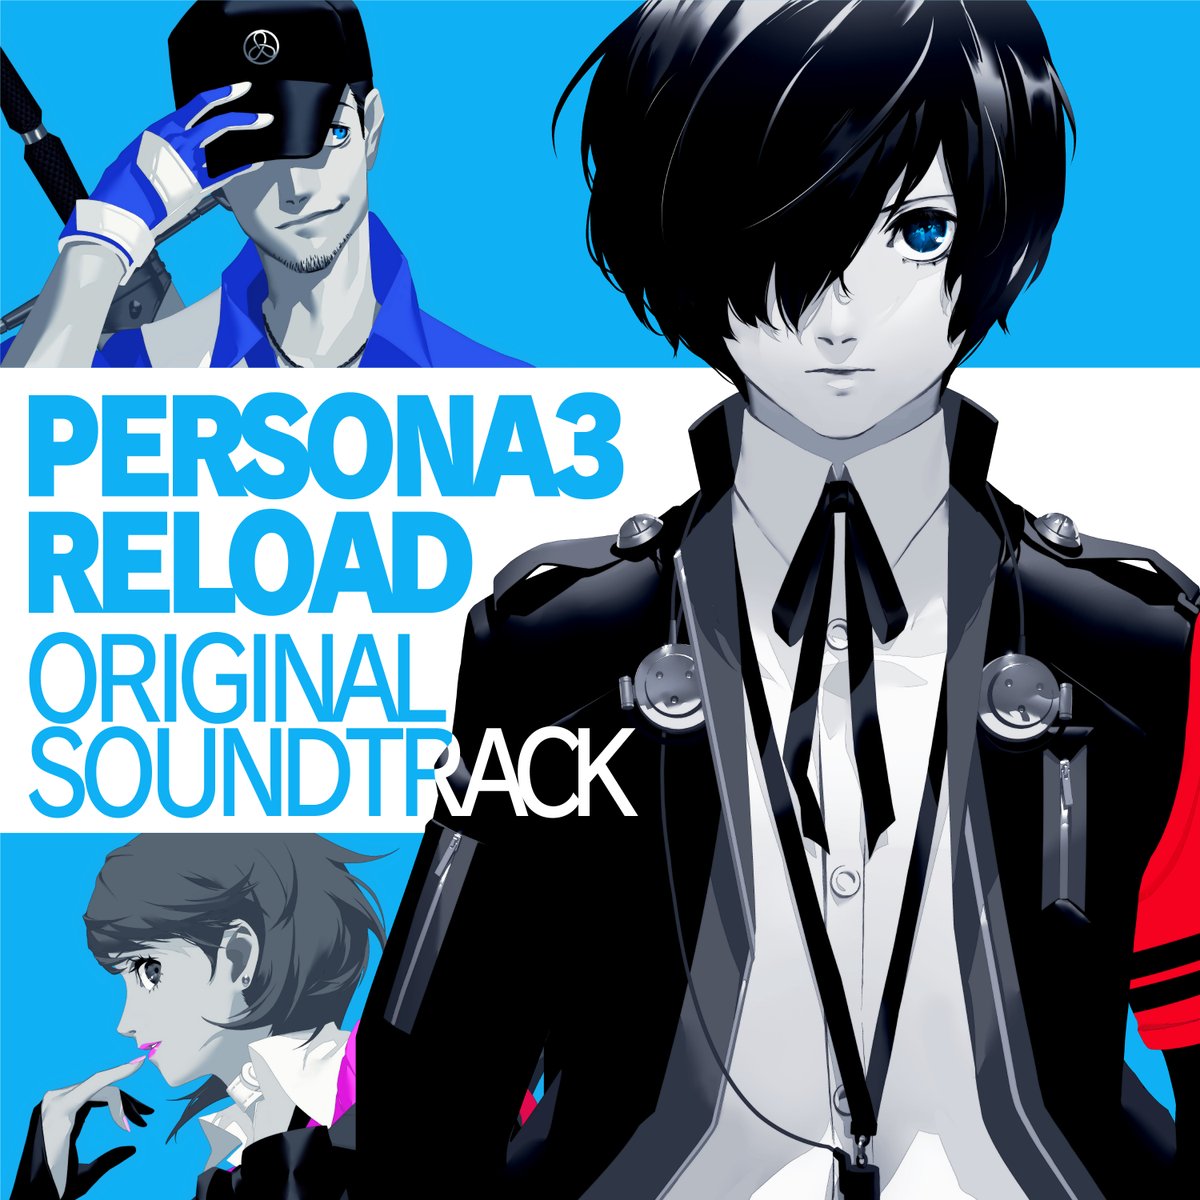 Disturb the peace with the Persona 3 Reload Soundtrack, now available for streaming and purchase! 💿💙🎶 Enjoy the full collection on Spotify, Apple Music, YouTube Music, Amazon Music, and iTunes. More details ➡️ atlus.link/P3R-Soundtrack